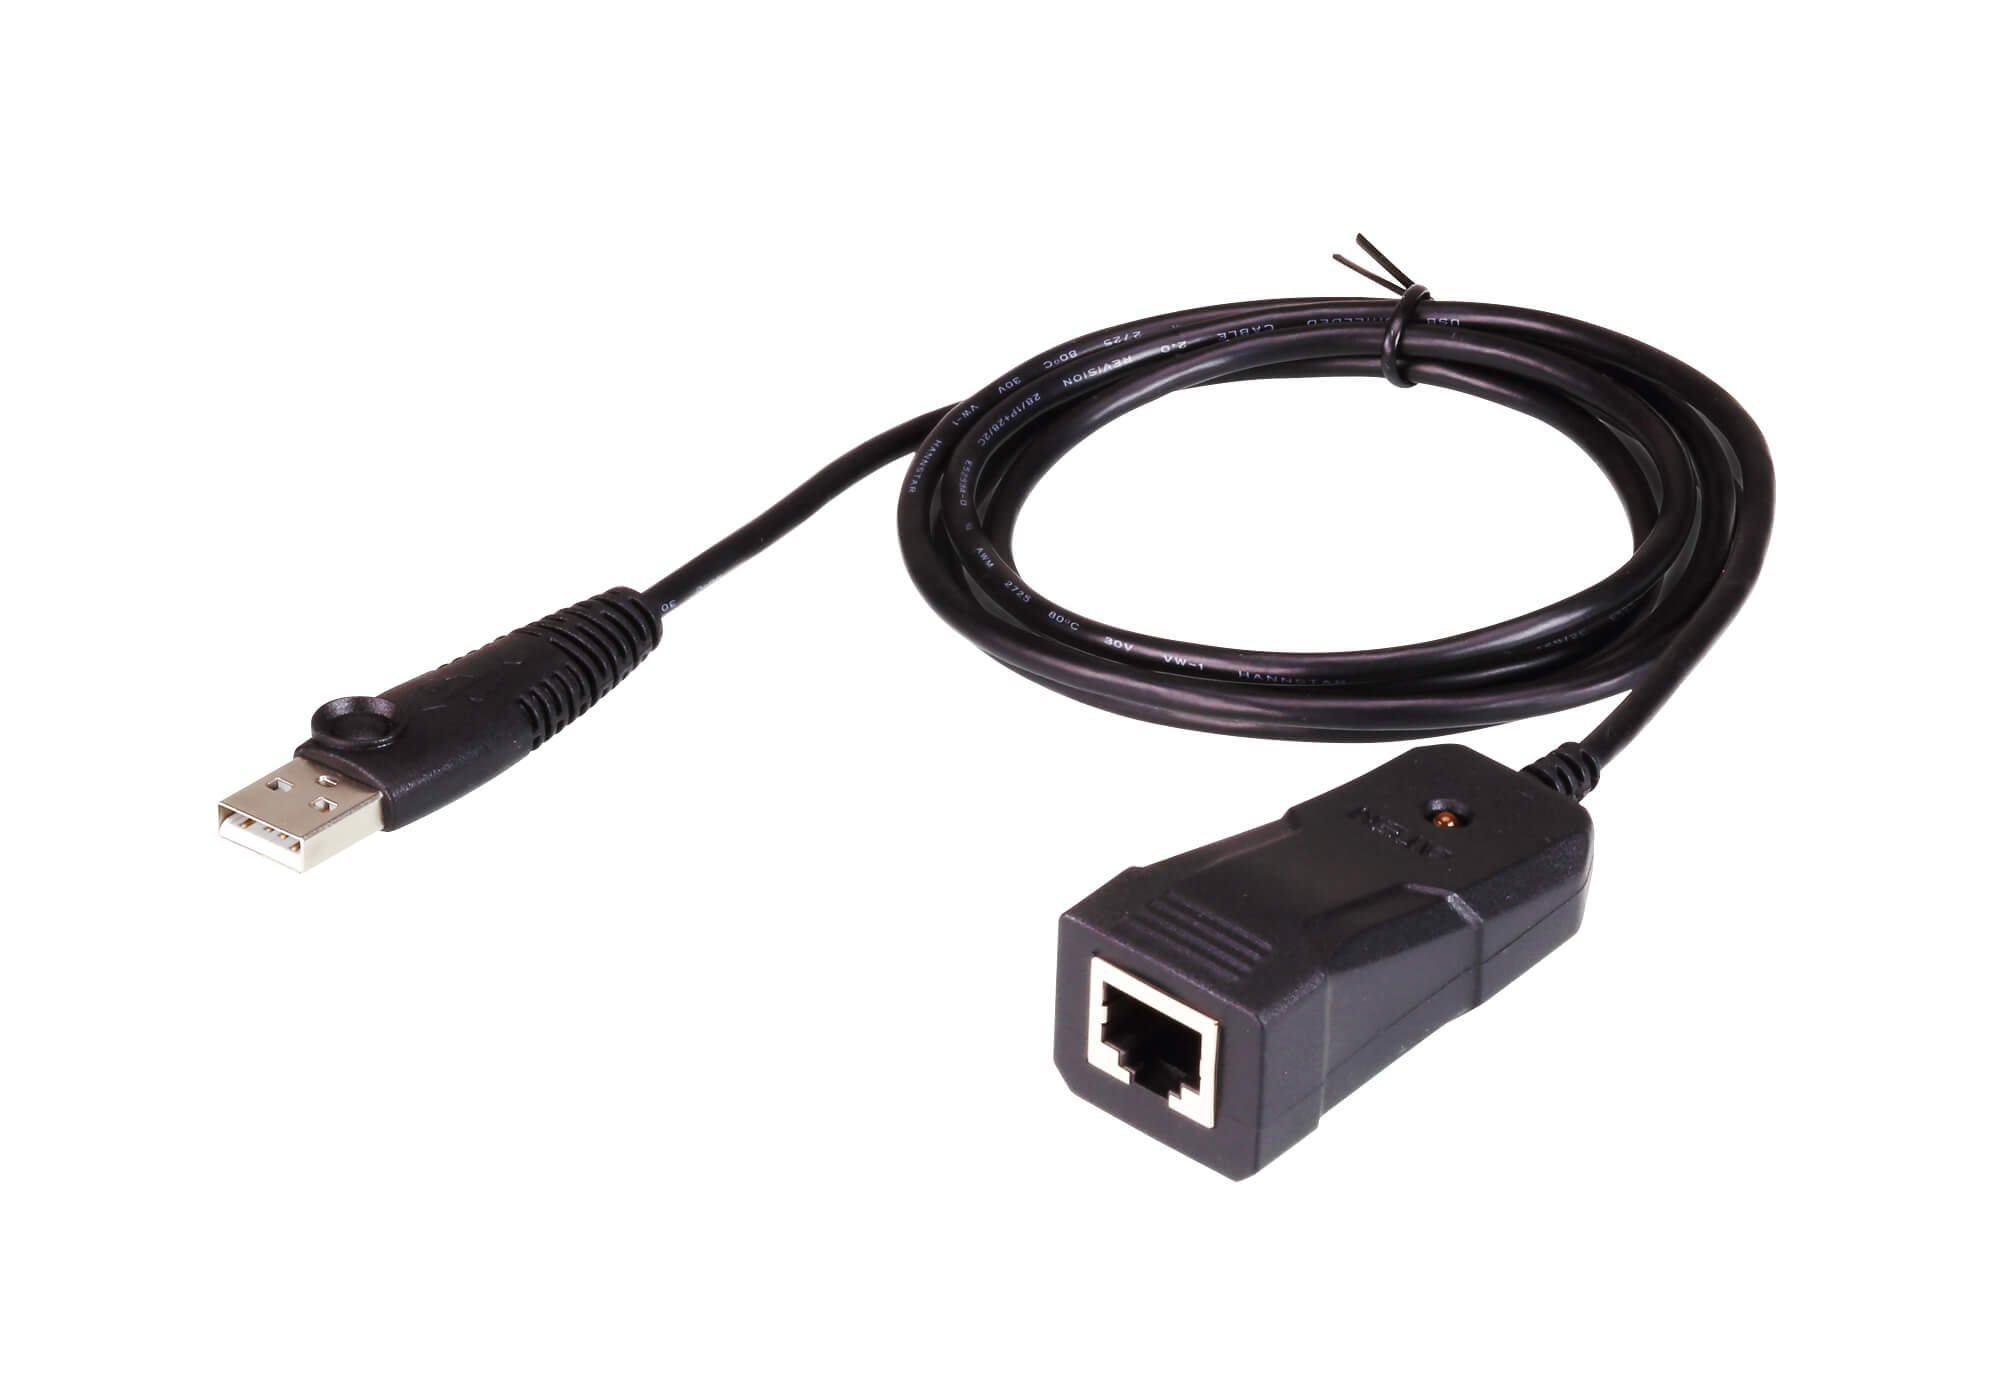 You Recently Viewed Aten UC232B USB to RJ-45 (RS-232) Console Adapter Image